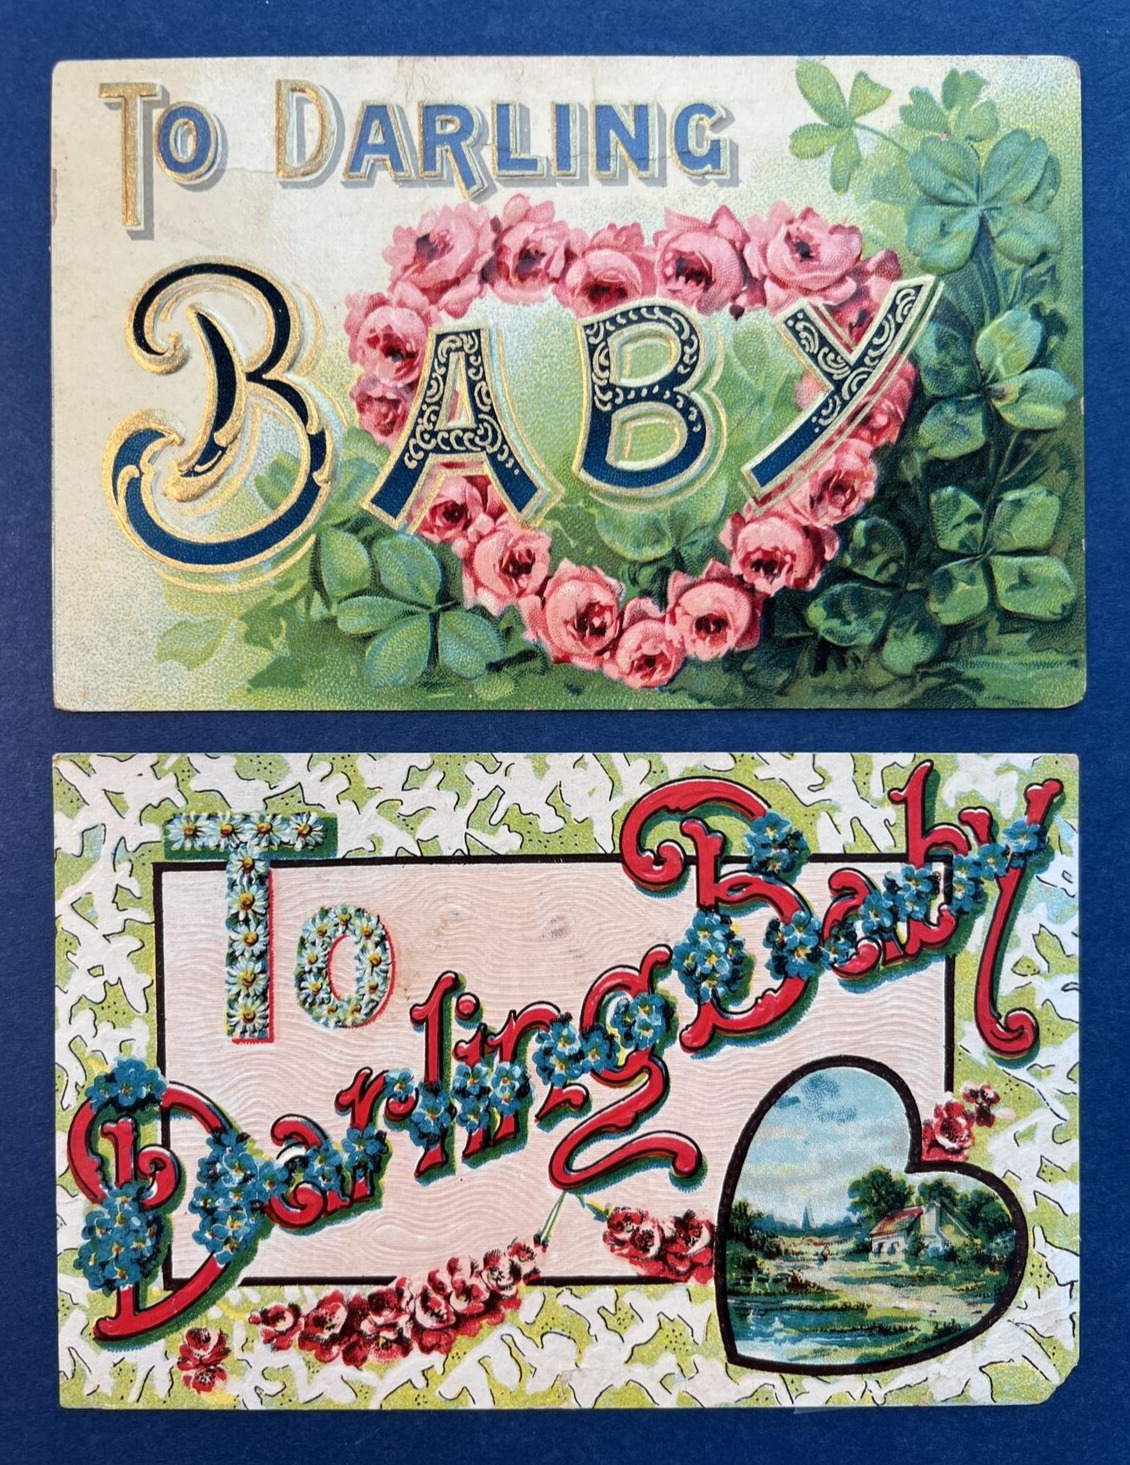 2 Family Greetings Antique Postcards. EMB w 1 Gold trim. To Darling Baby.